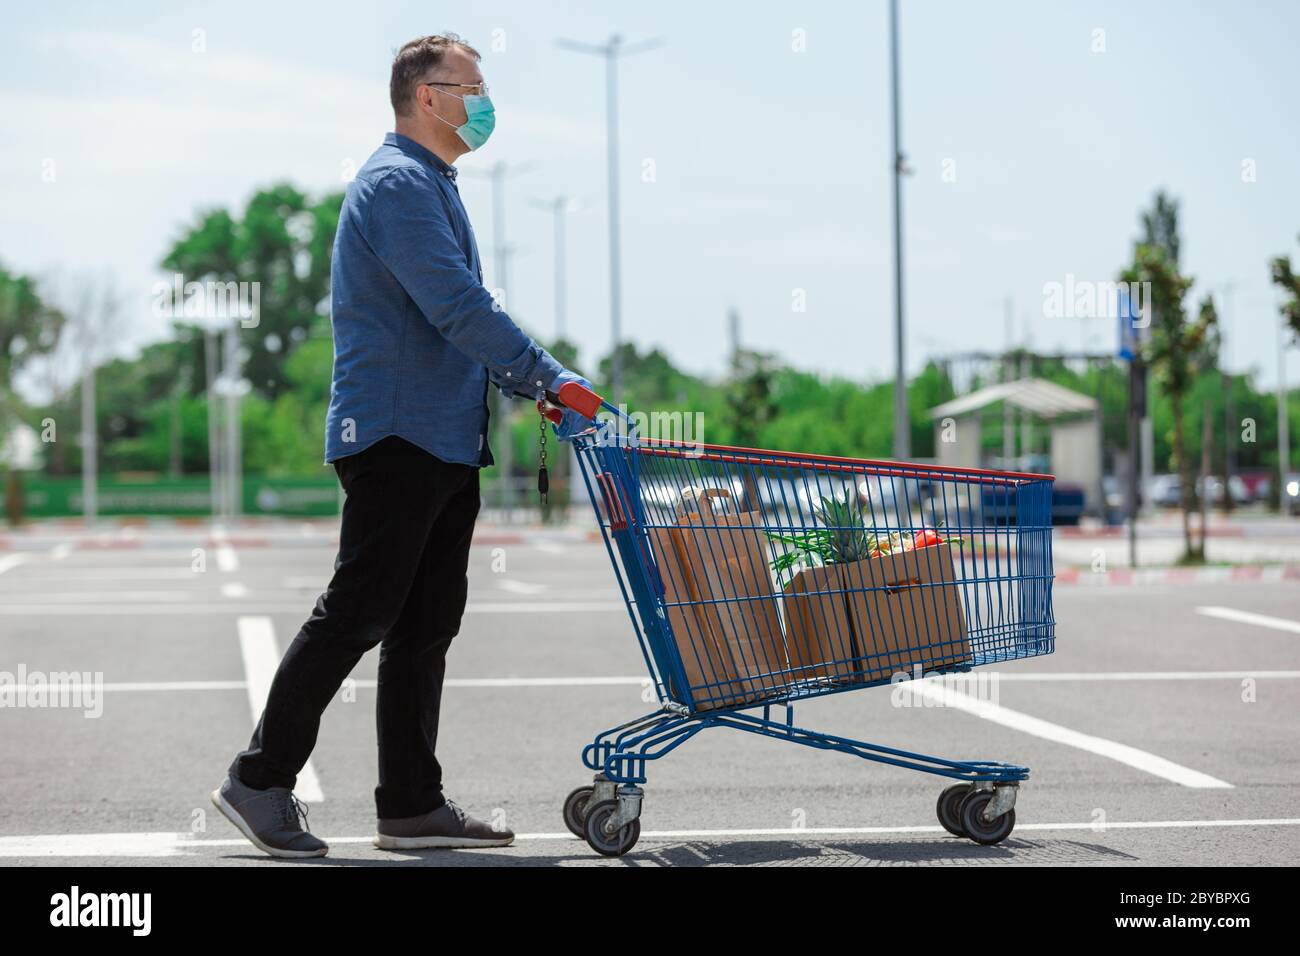 Senior man pushing a shopping cart full of bags and food box, man delivering food with protective mask and gloves Stock Photo